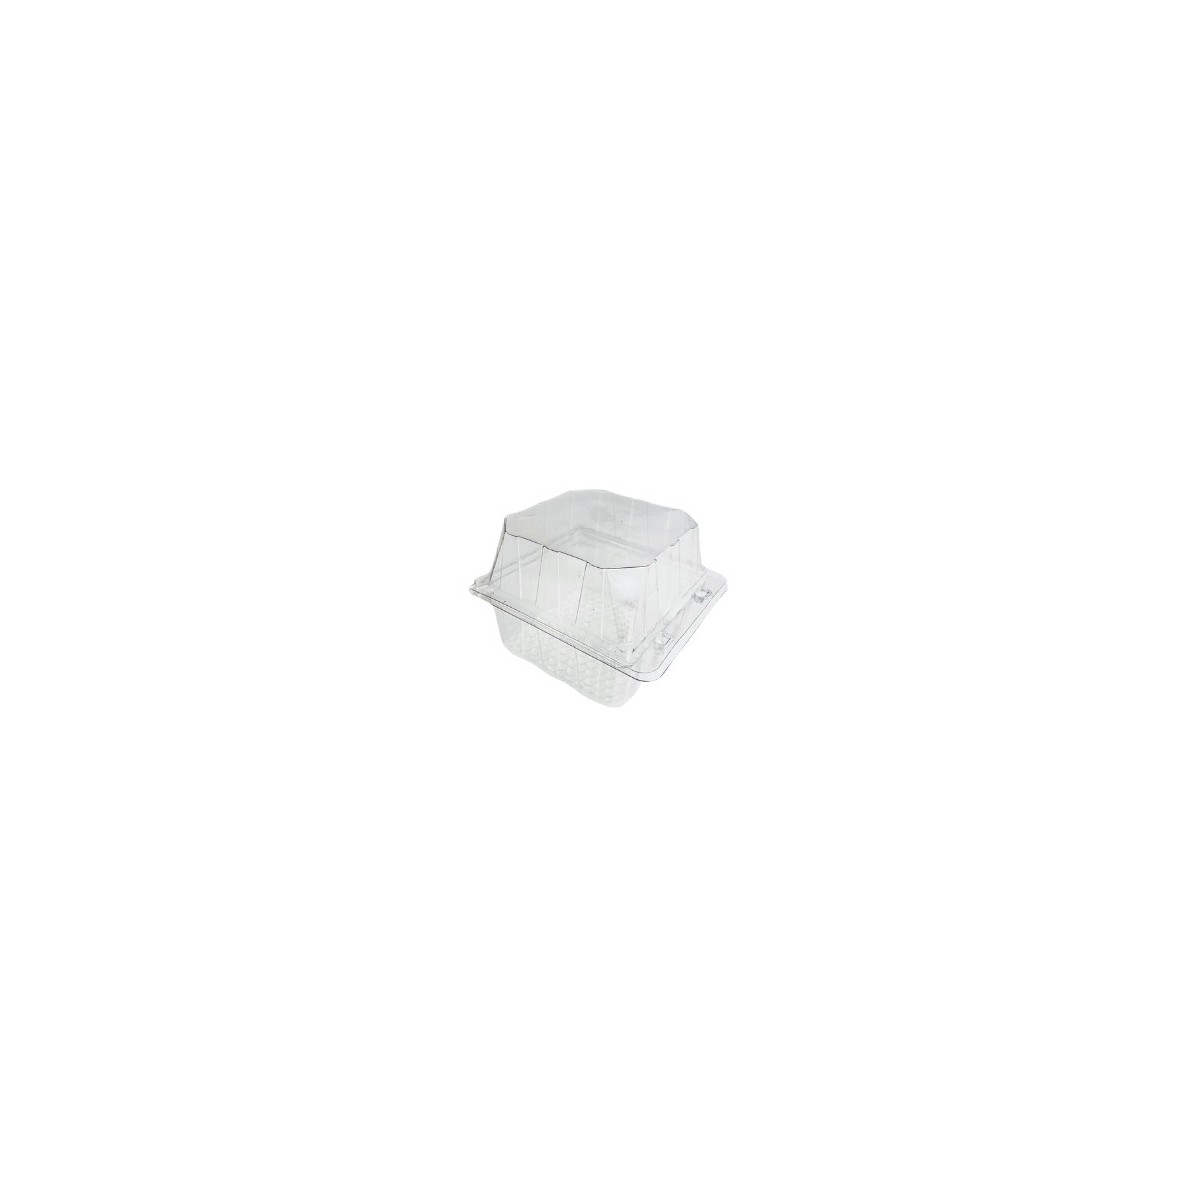 PATIPACK SQUARE PASTRY BOX 10X10X9CM VENTILATED HINGED LID 405PCS 